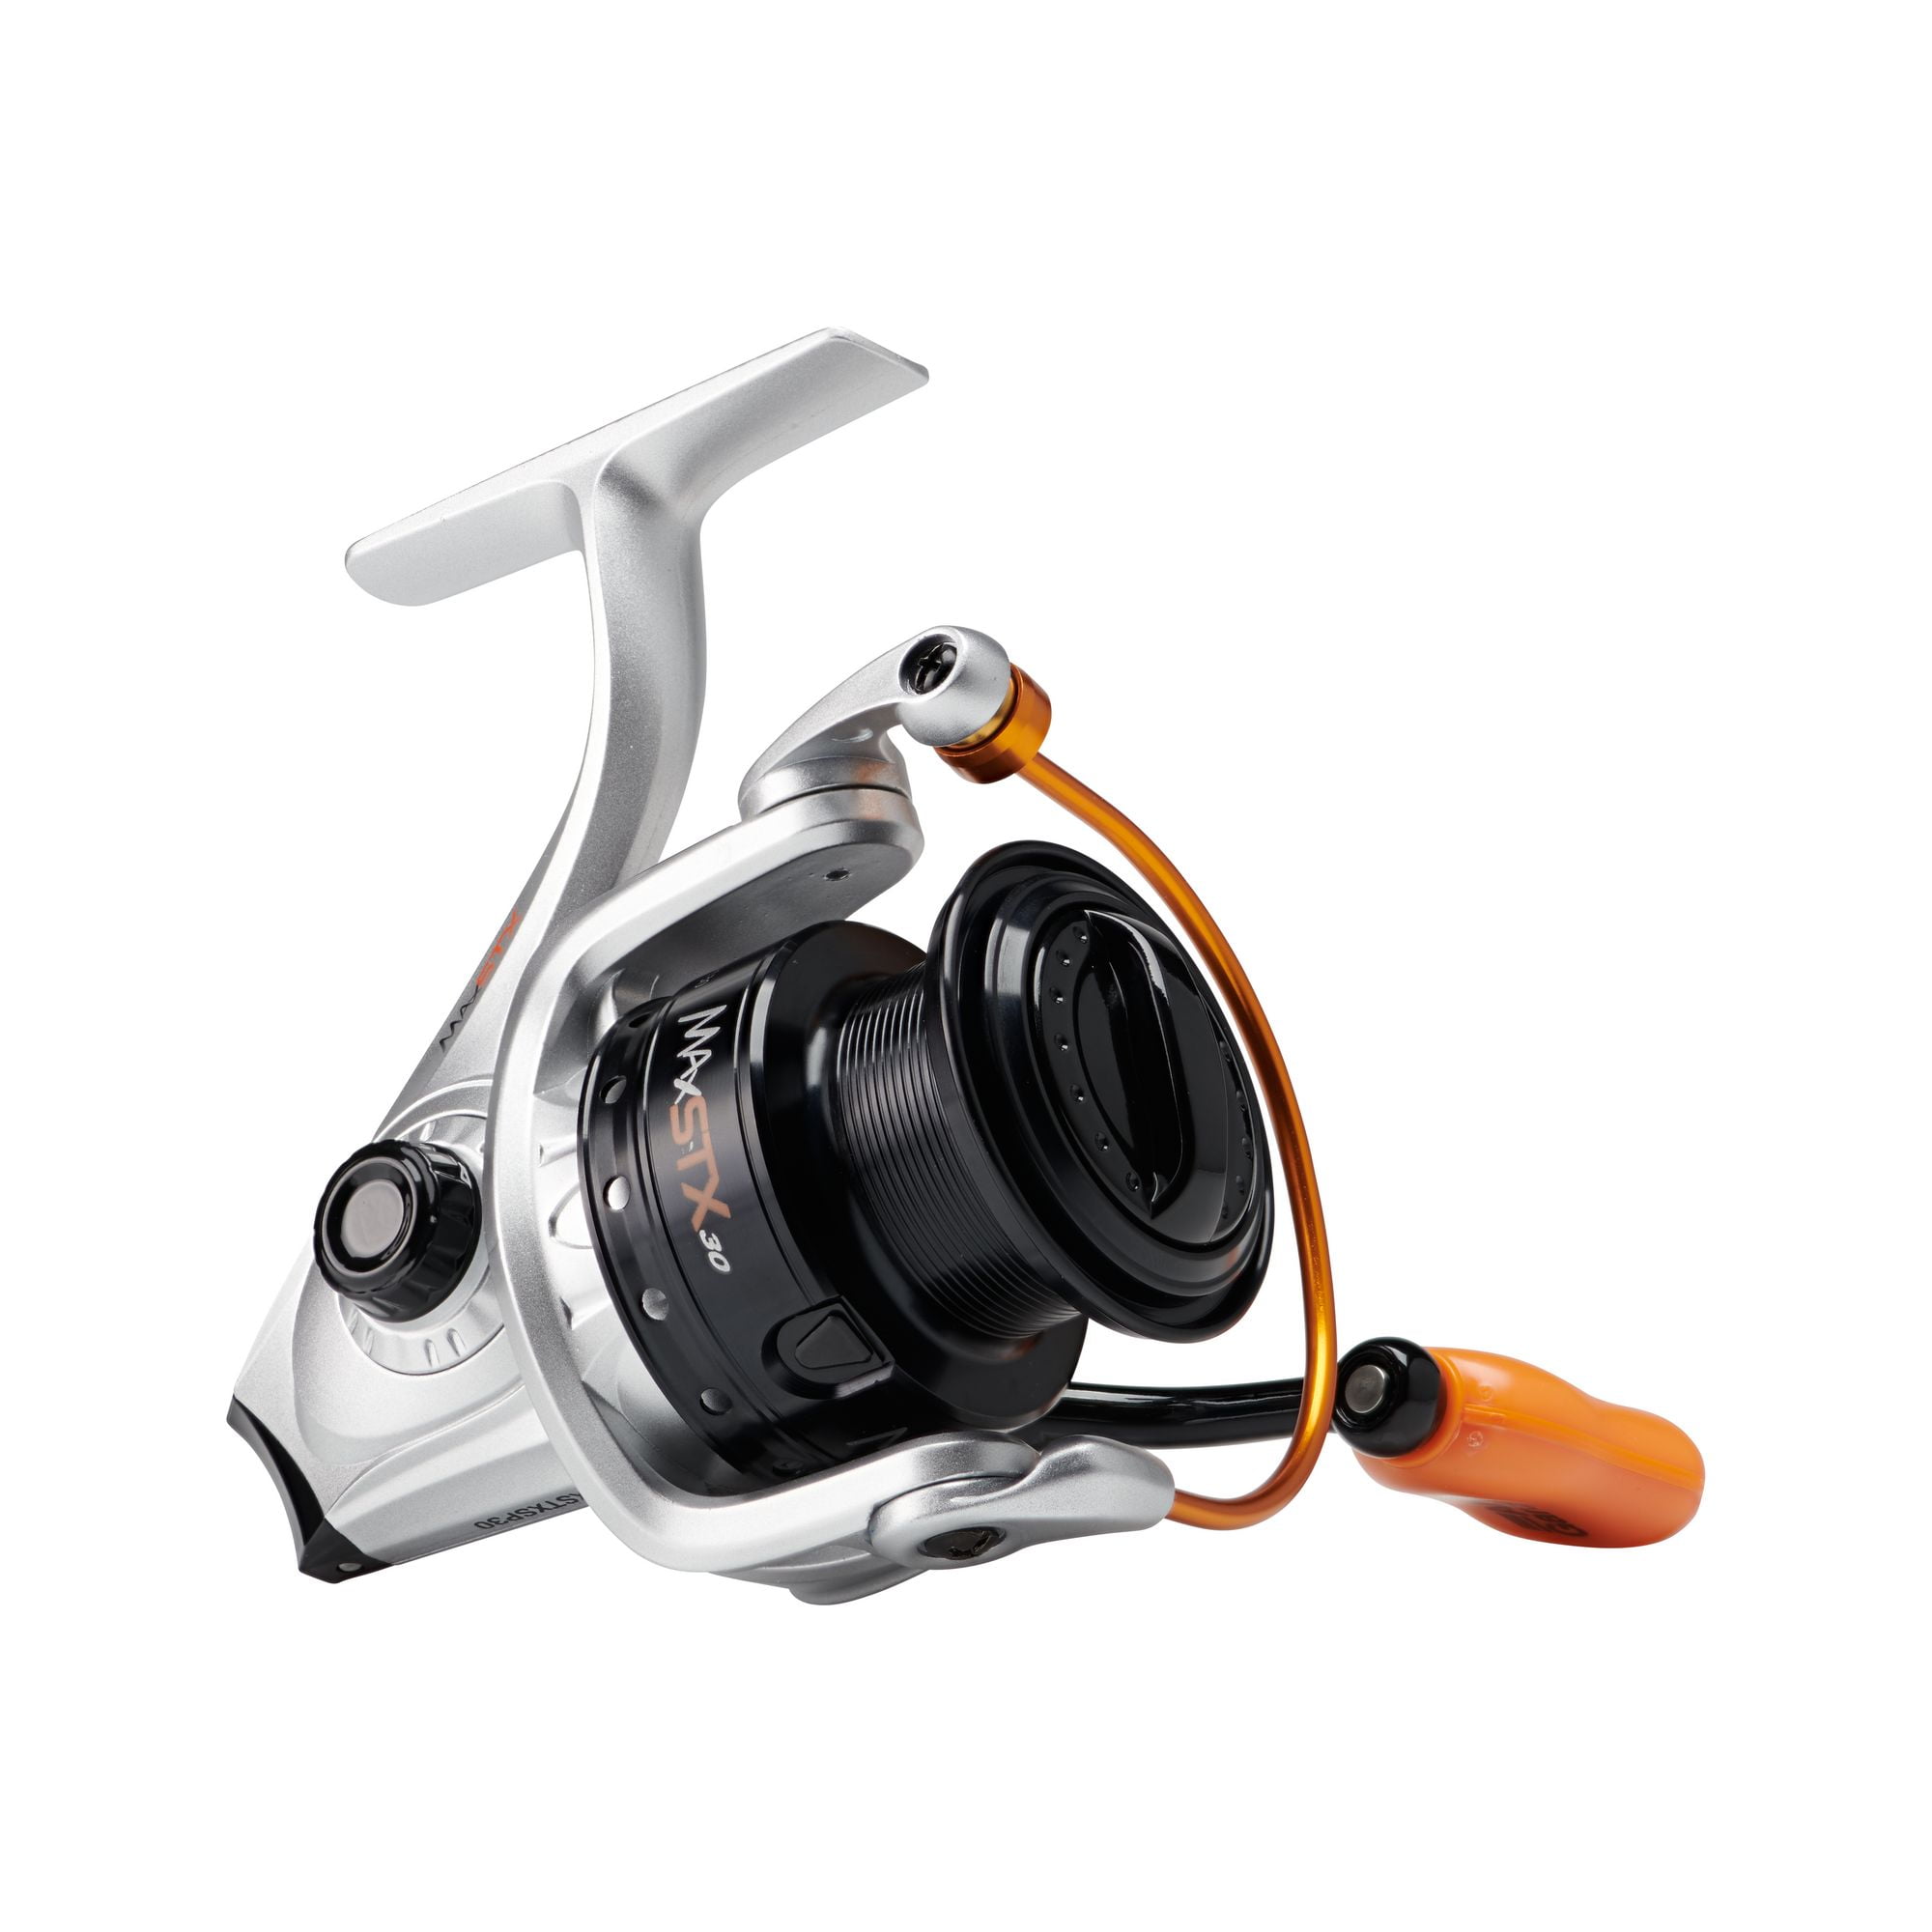 Zebco Bullet Spincast Fishing Reel, 8+1 Ball Bearings with an 